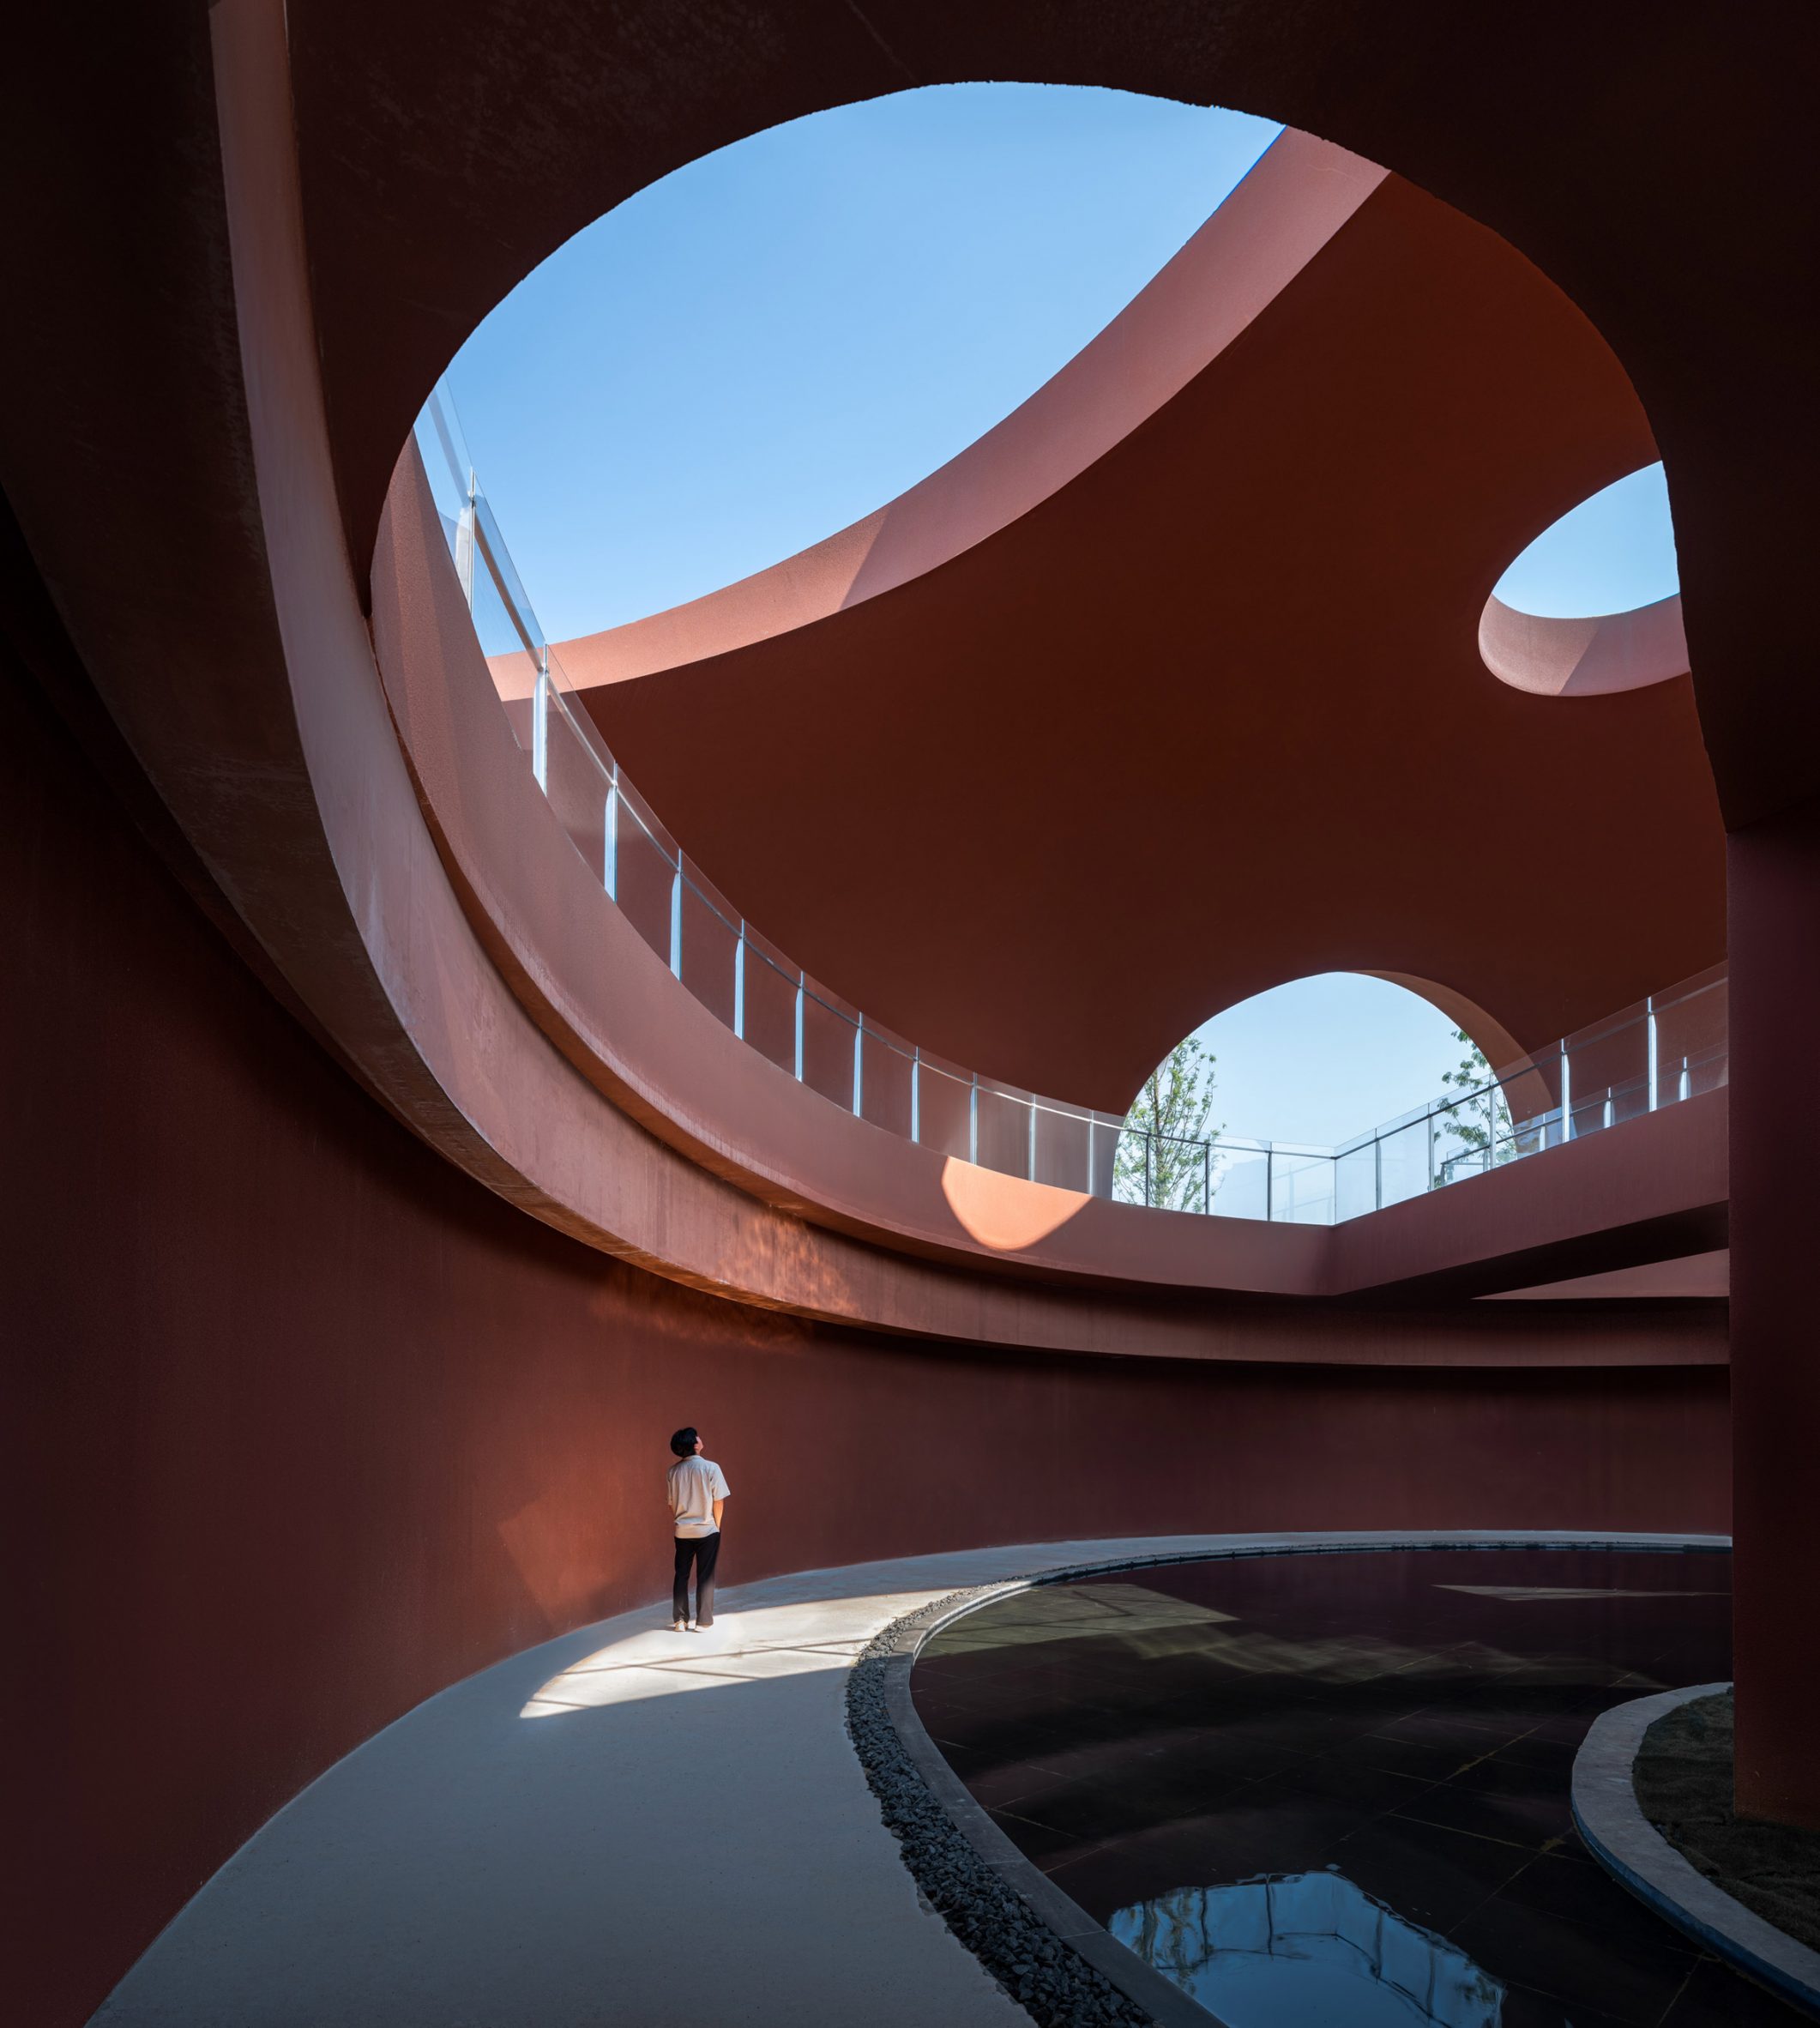 Courtyard surrounding by red-concrete walls